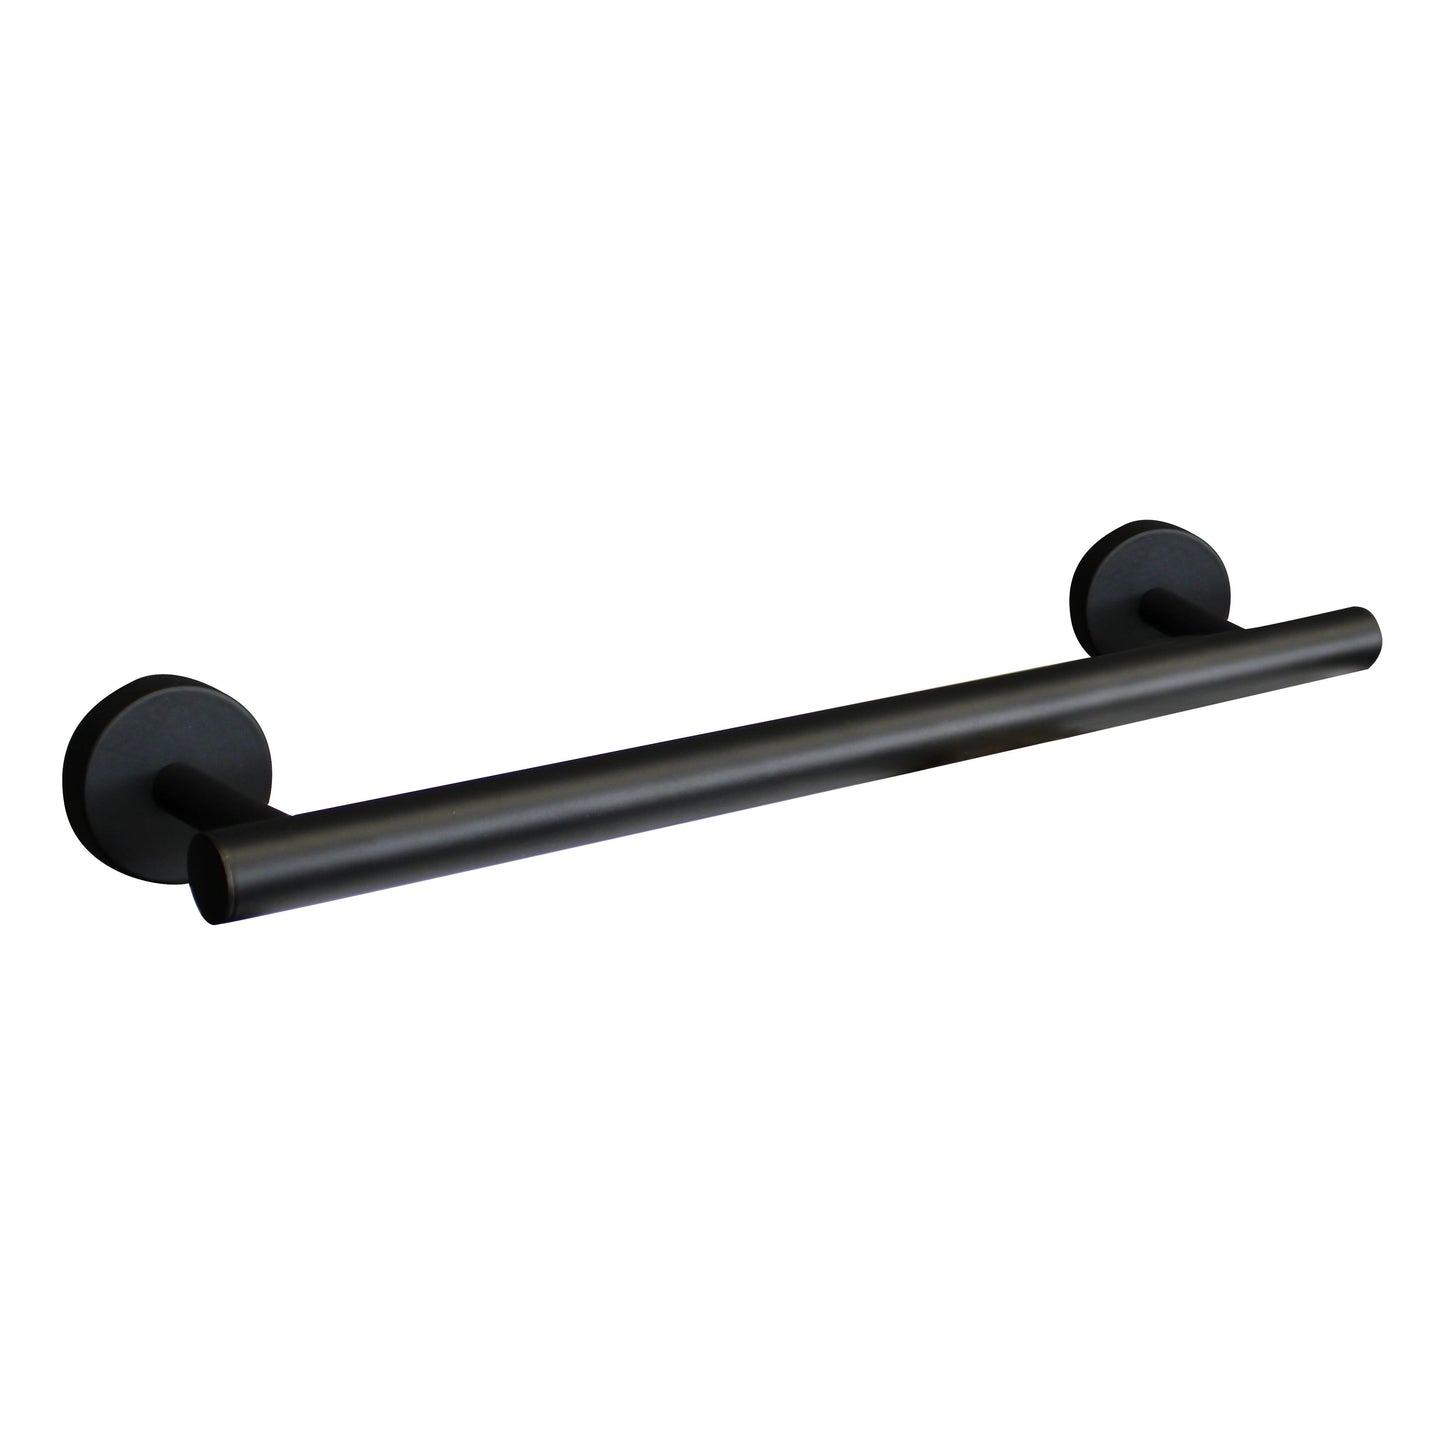 Towel rail 24 inches (600) 9943M6 **Special order**